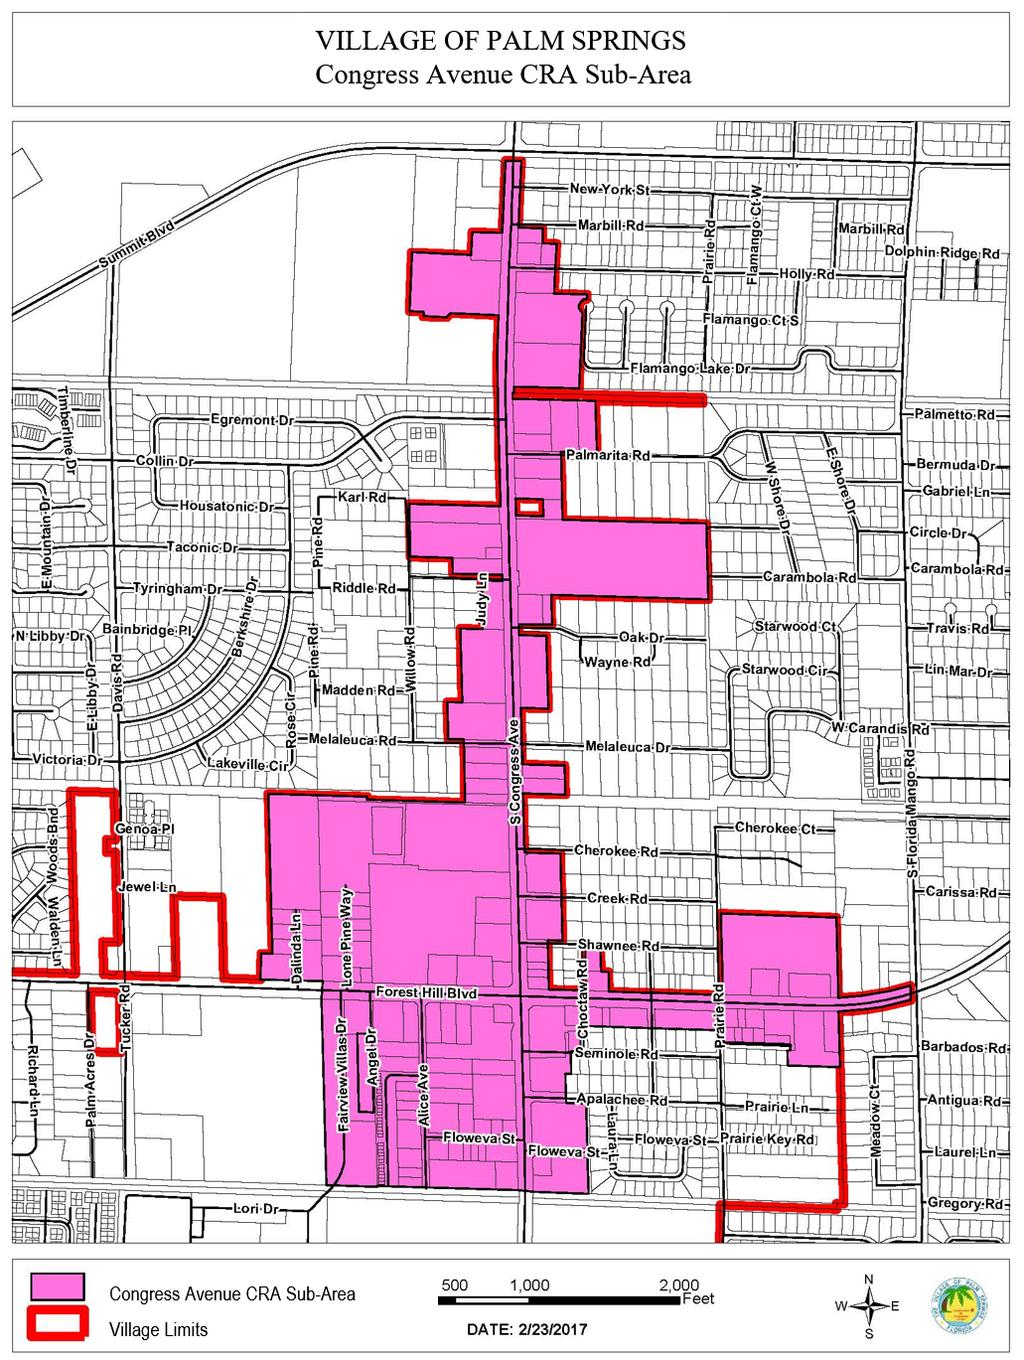 ATTACHMENT A BOUNDARY MAP OF VILLAGE OF PALM SPRINGS PROPOSED